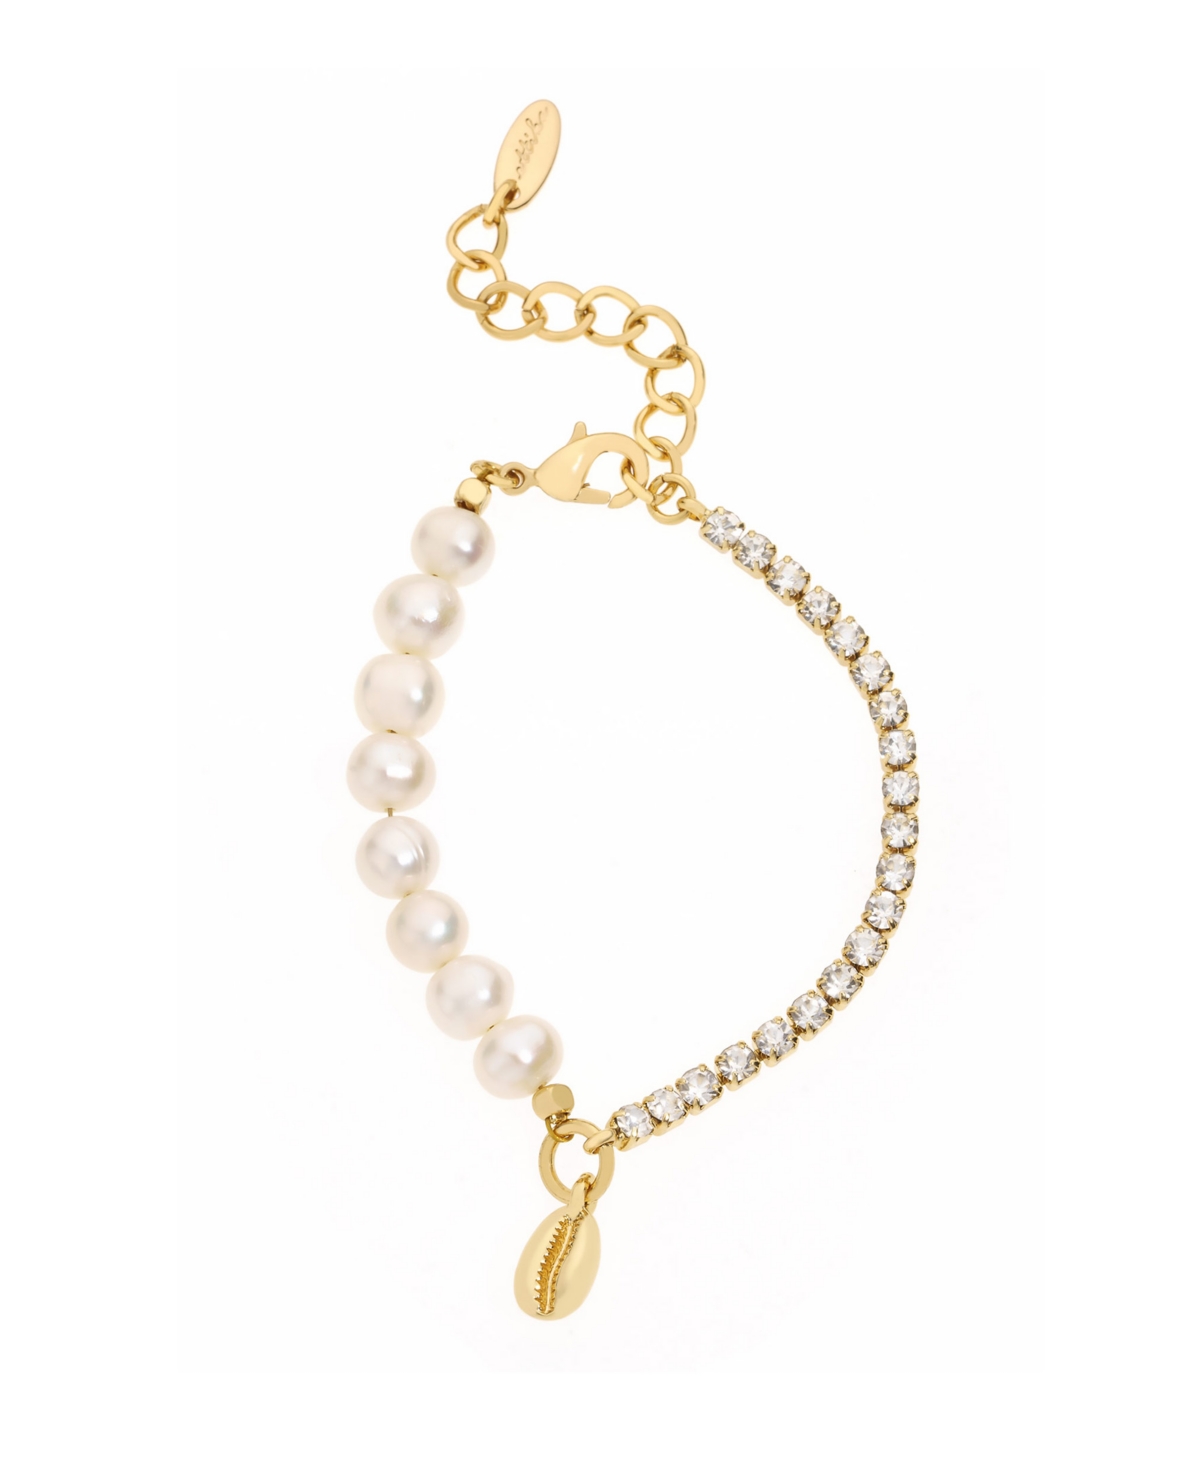 Cowrie Shell, Cultivated Freshwater Pearl Glass Bracelet - Gold-Plated